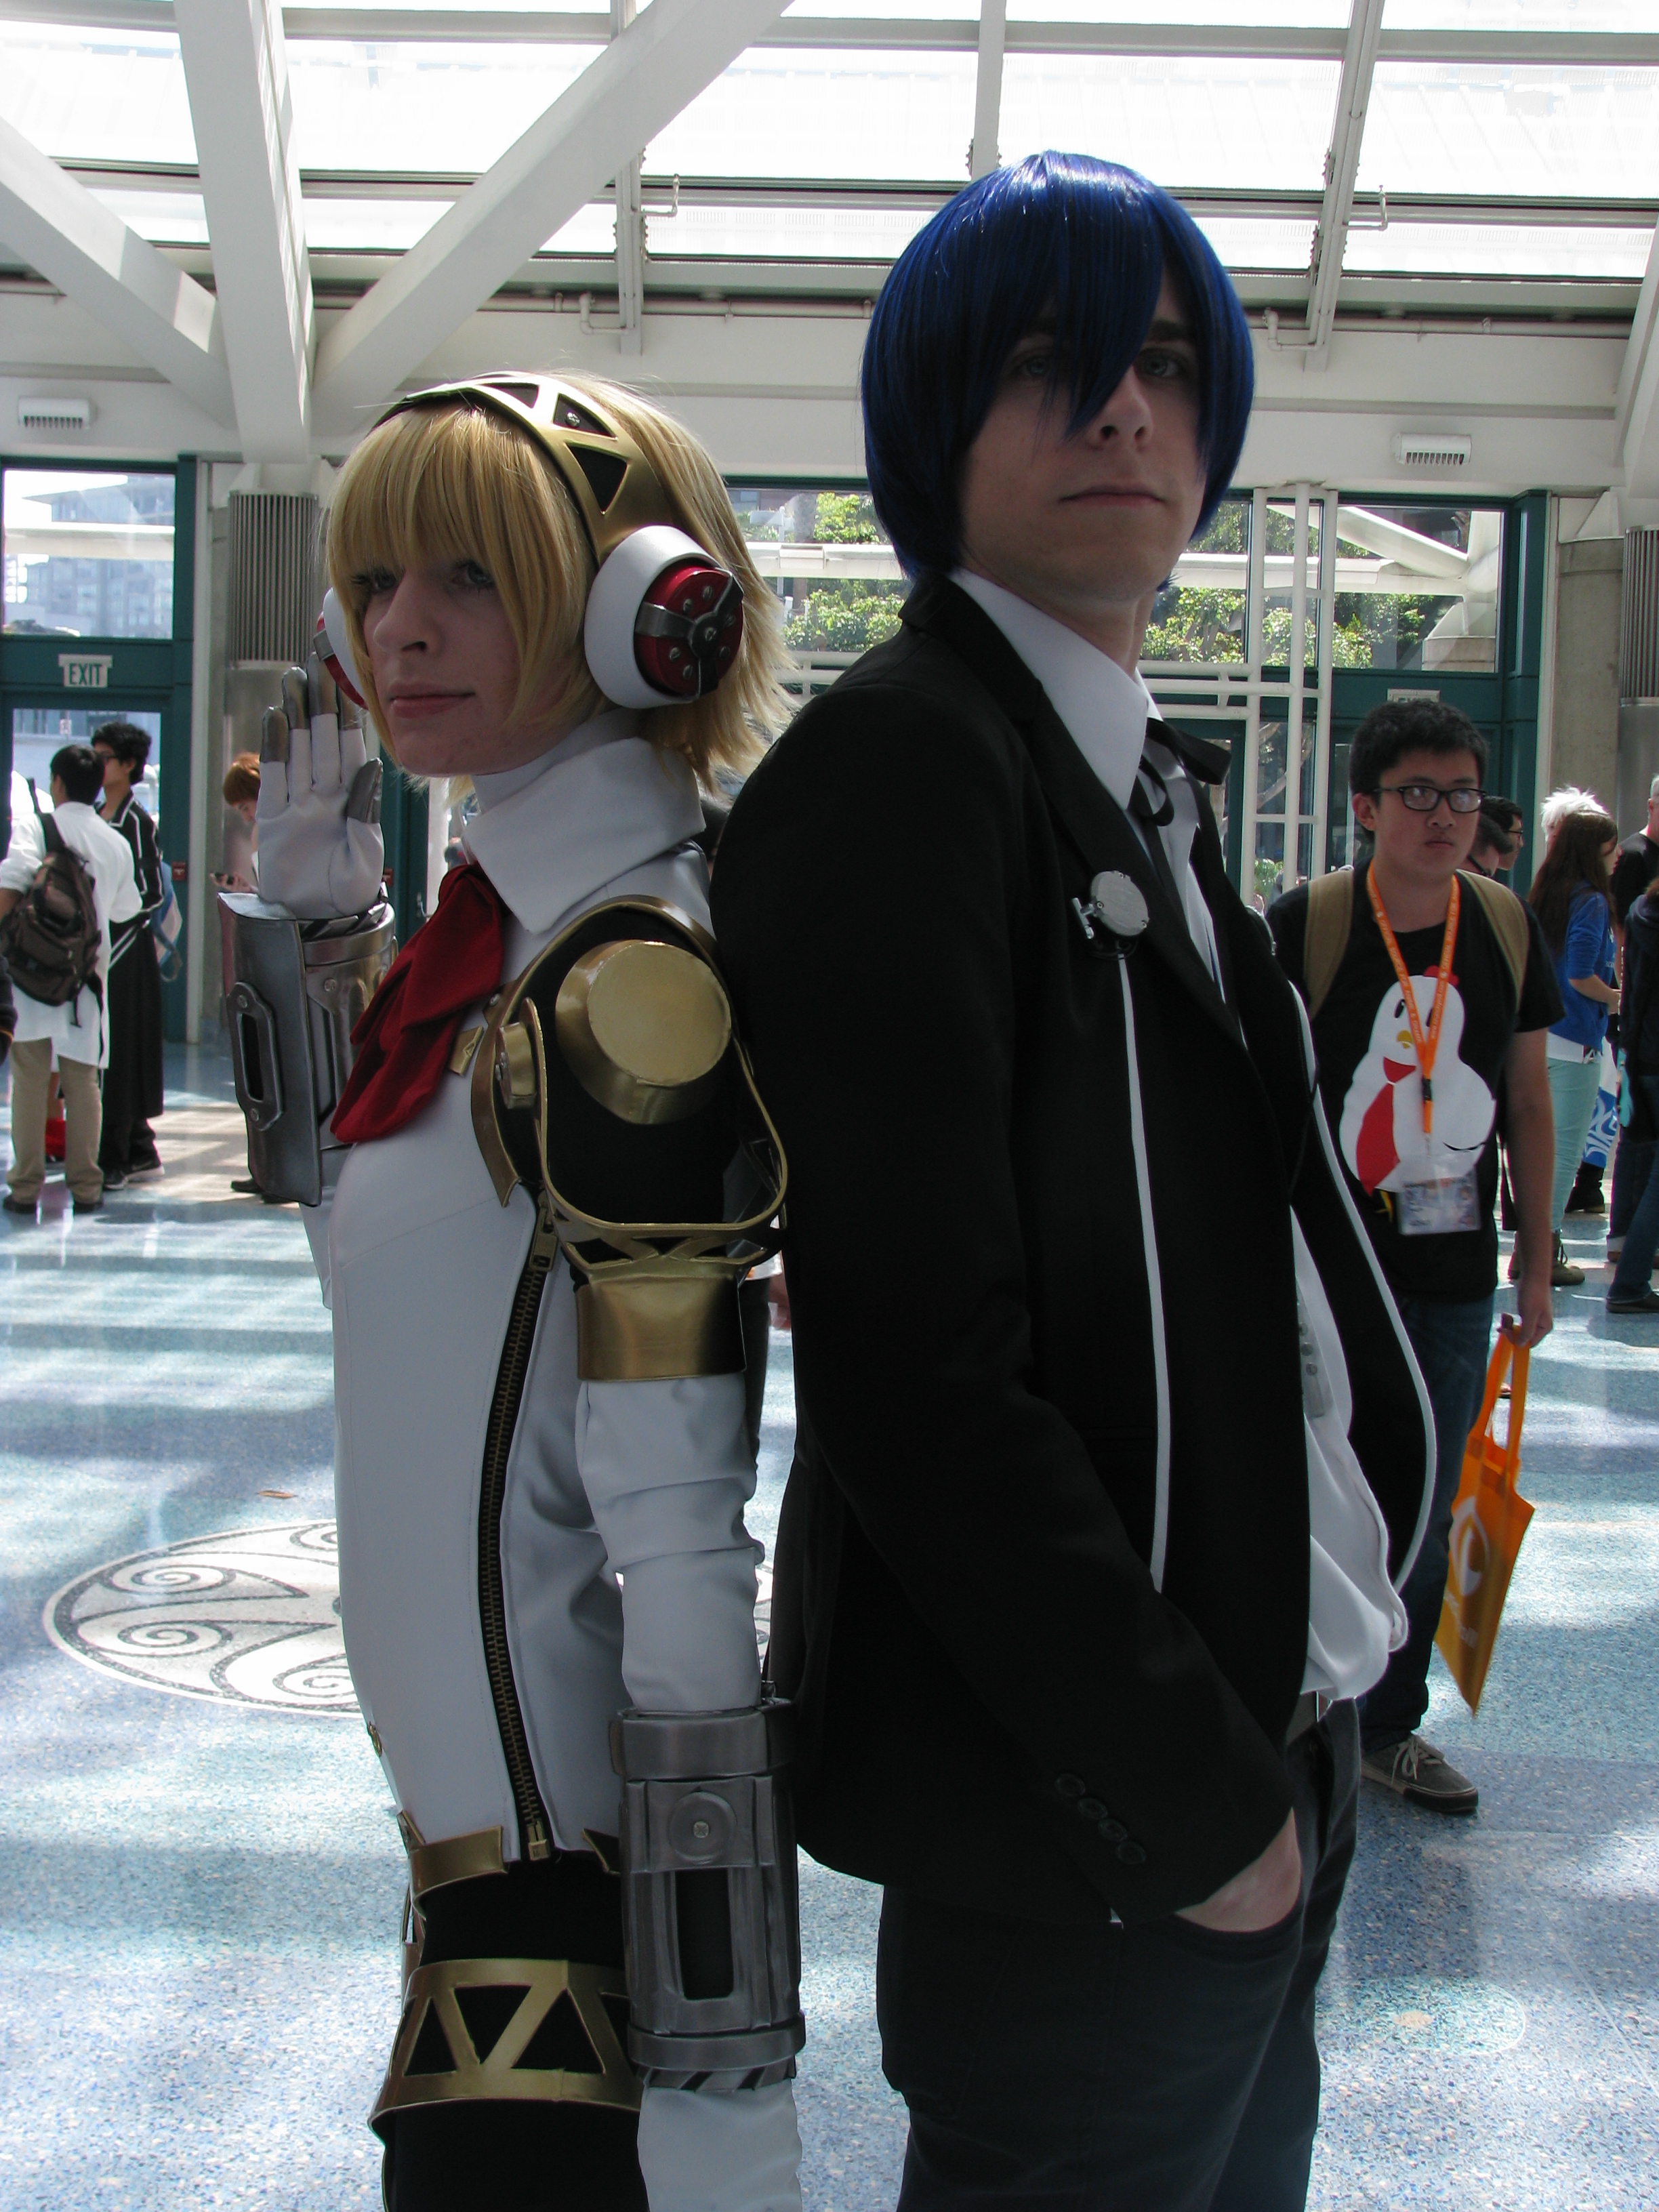 File:Persona 3 Aigis and Protagonist cosplay at Anime Expo 2014.jpg ...